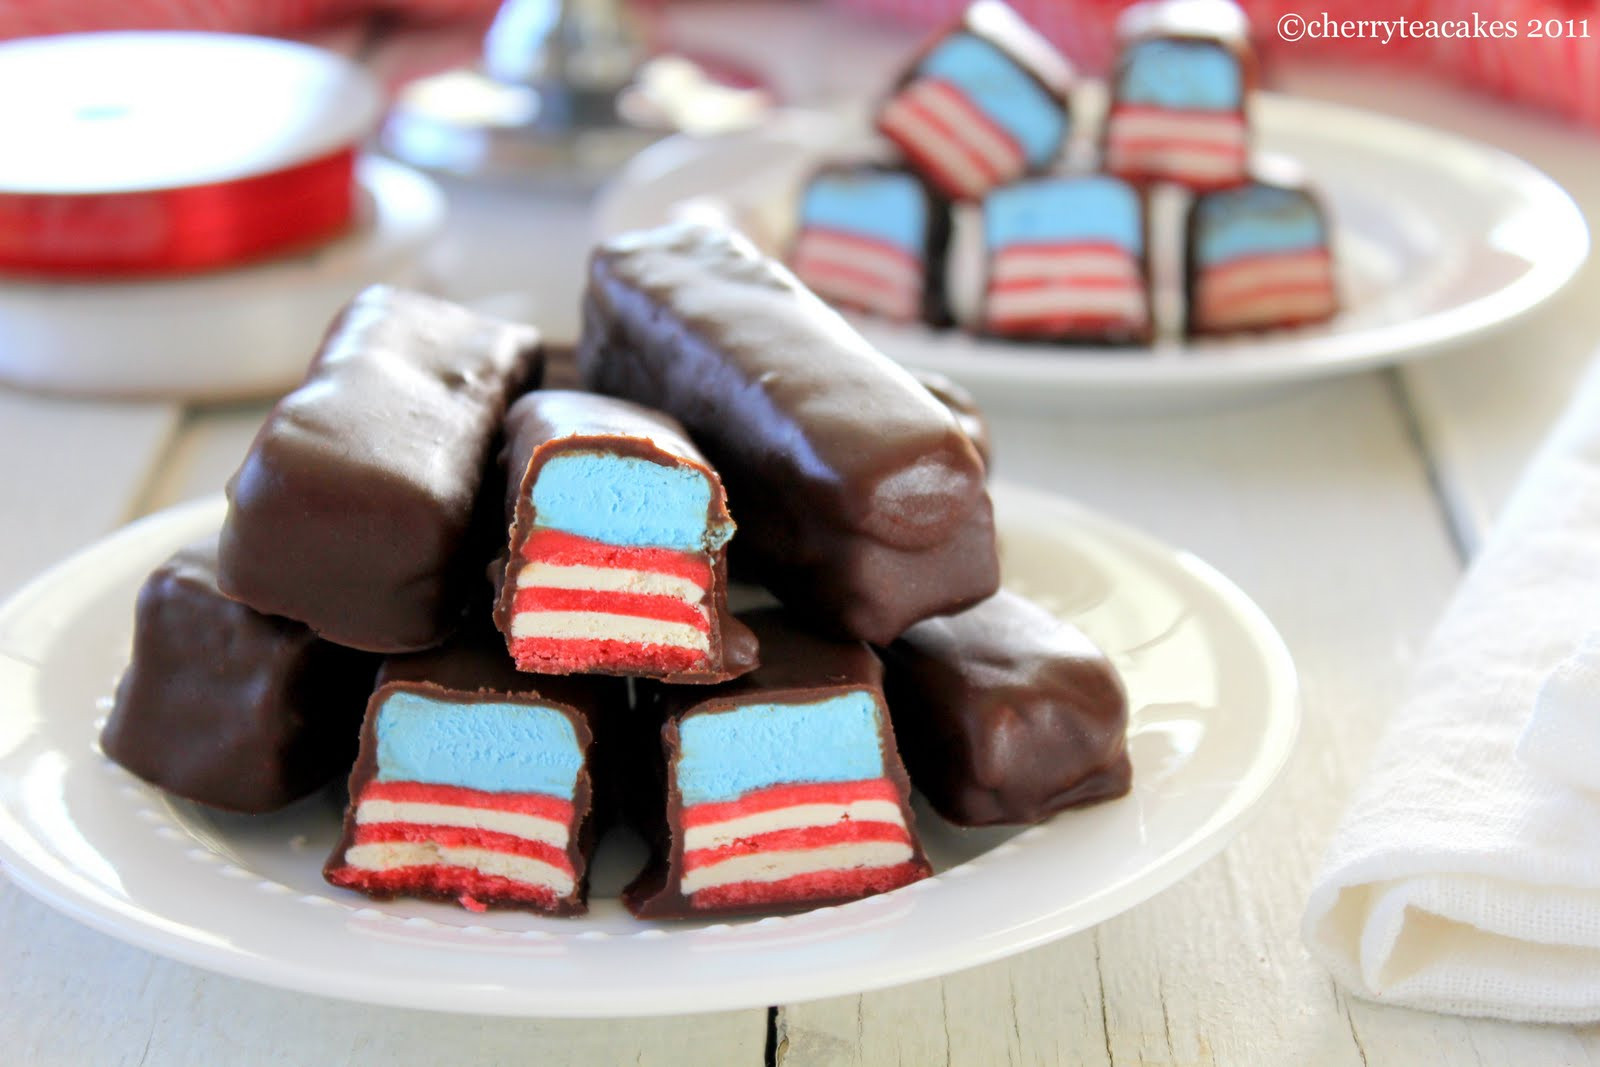 4Th July Desserts
 15 Fun Red White & Blue Desserts For The 4th of July